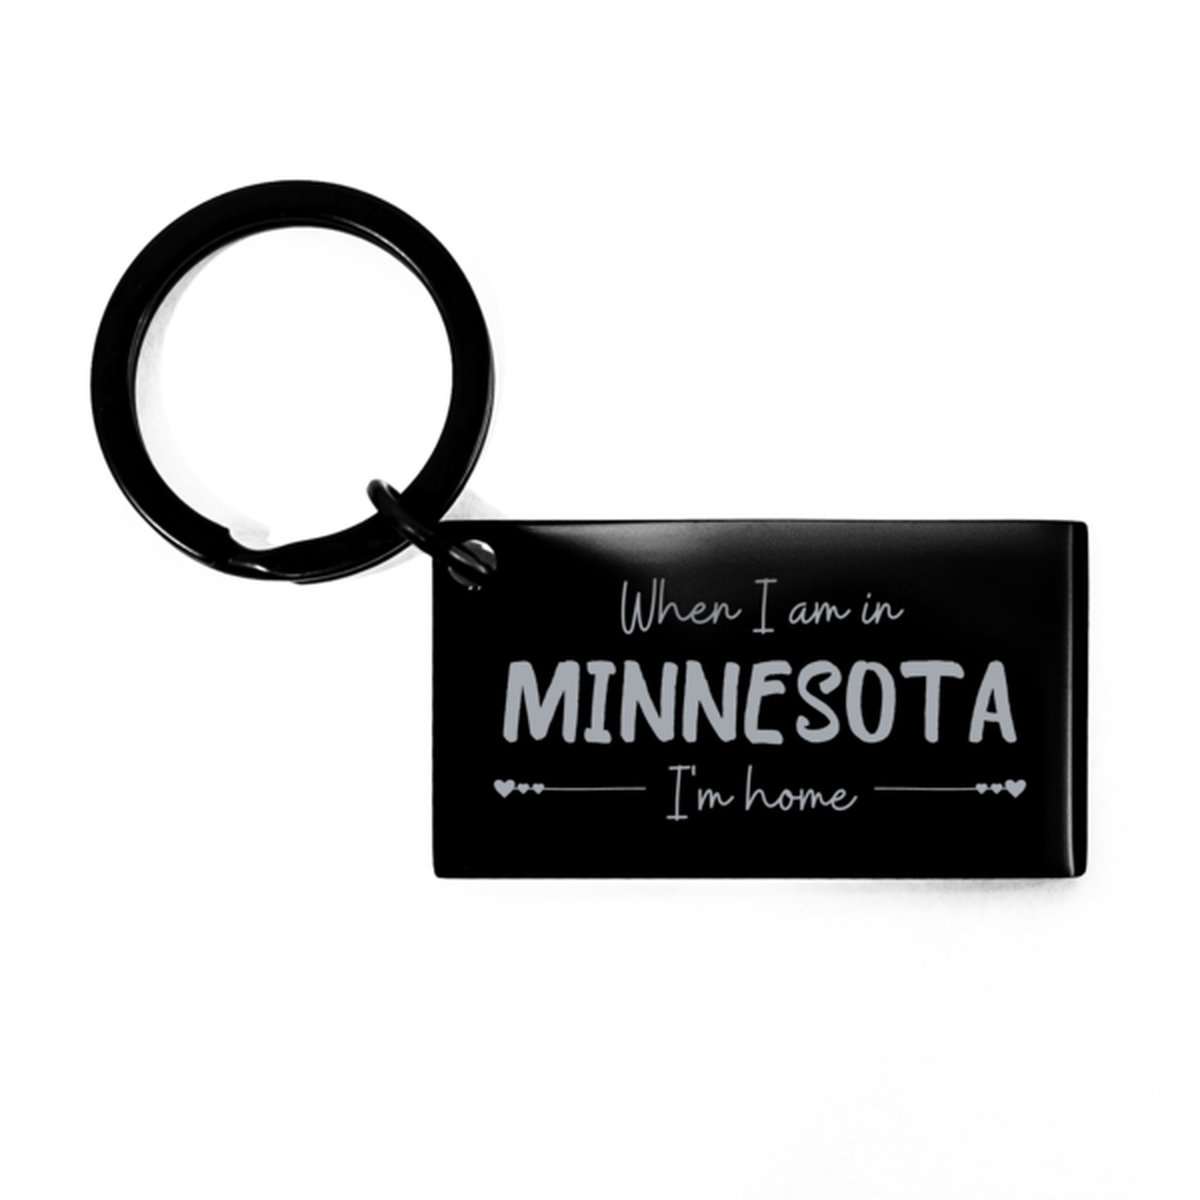 When I am in Minnesota I'm home Keychain, Cheap Gifts For Minnesota, State Minnesota Birthday Gifts for Friends Coworker